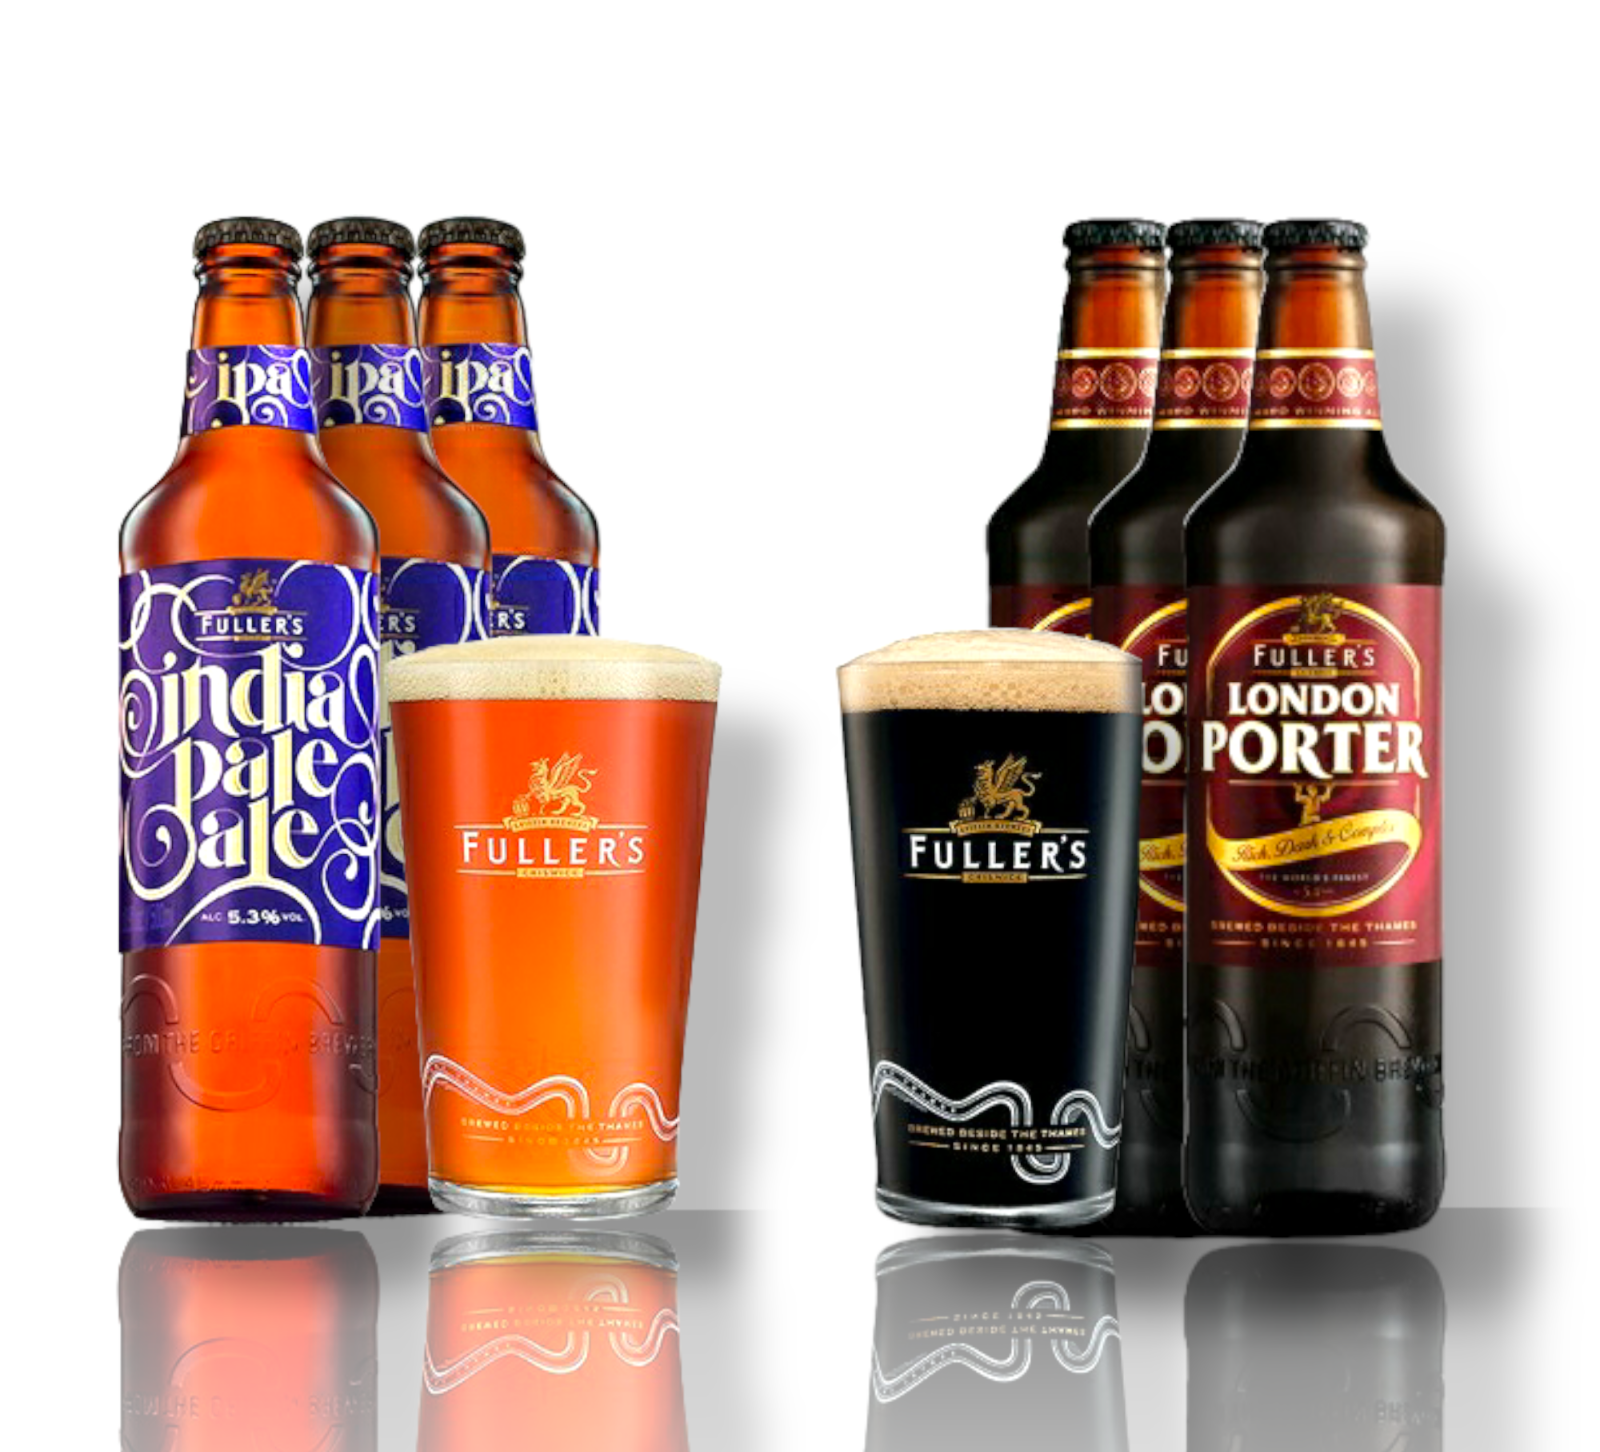 Fullers Brewery Bier im Mix - 3 x Fullers India Pale Ale + Fullers London Porter